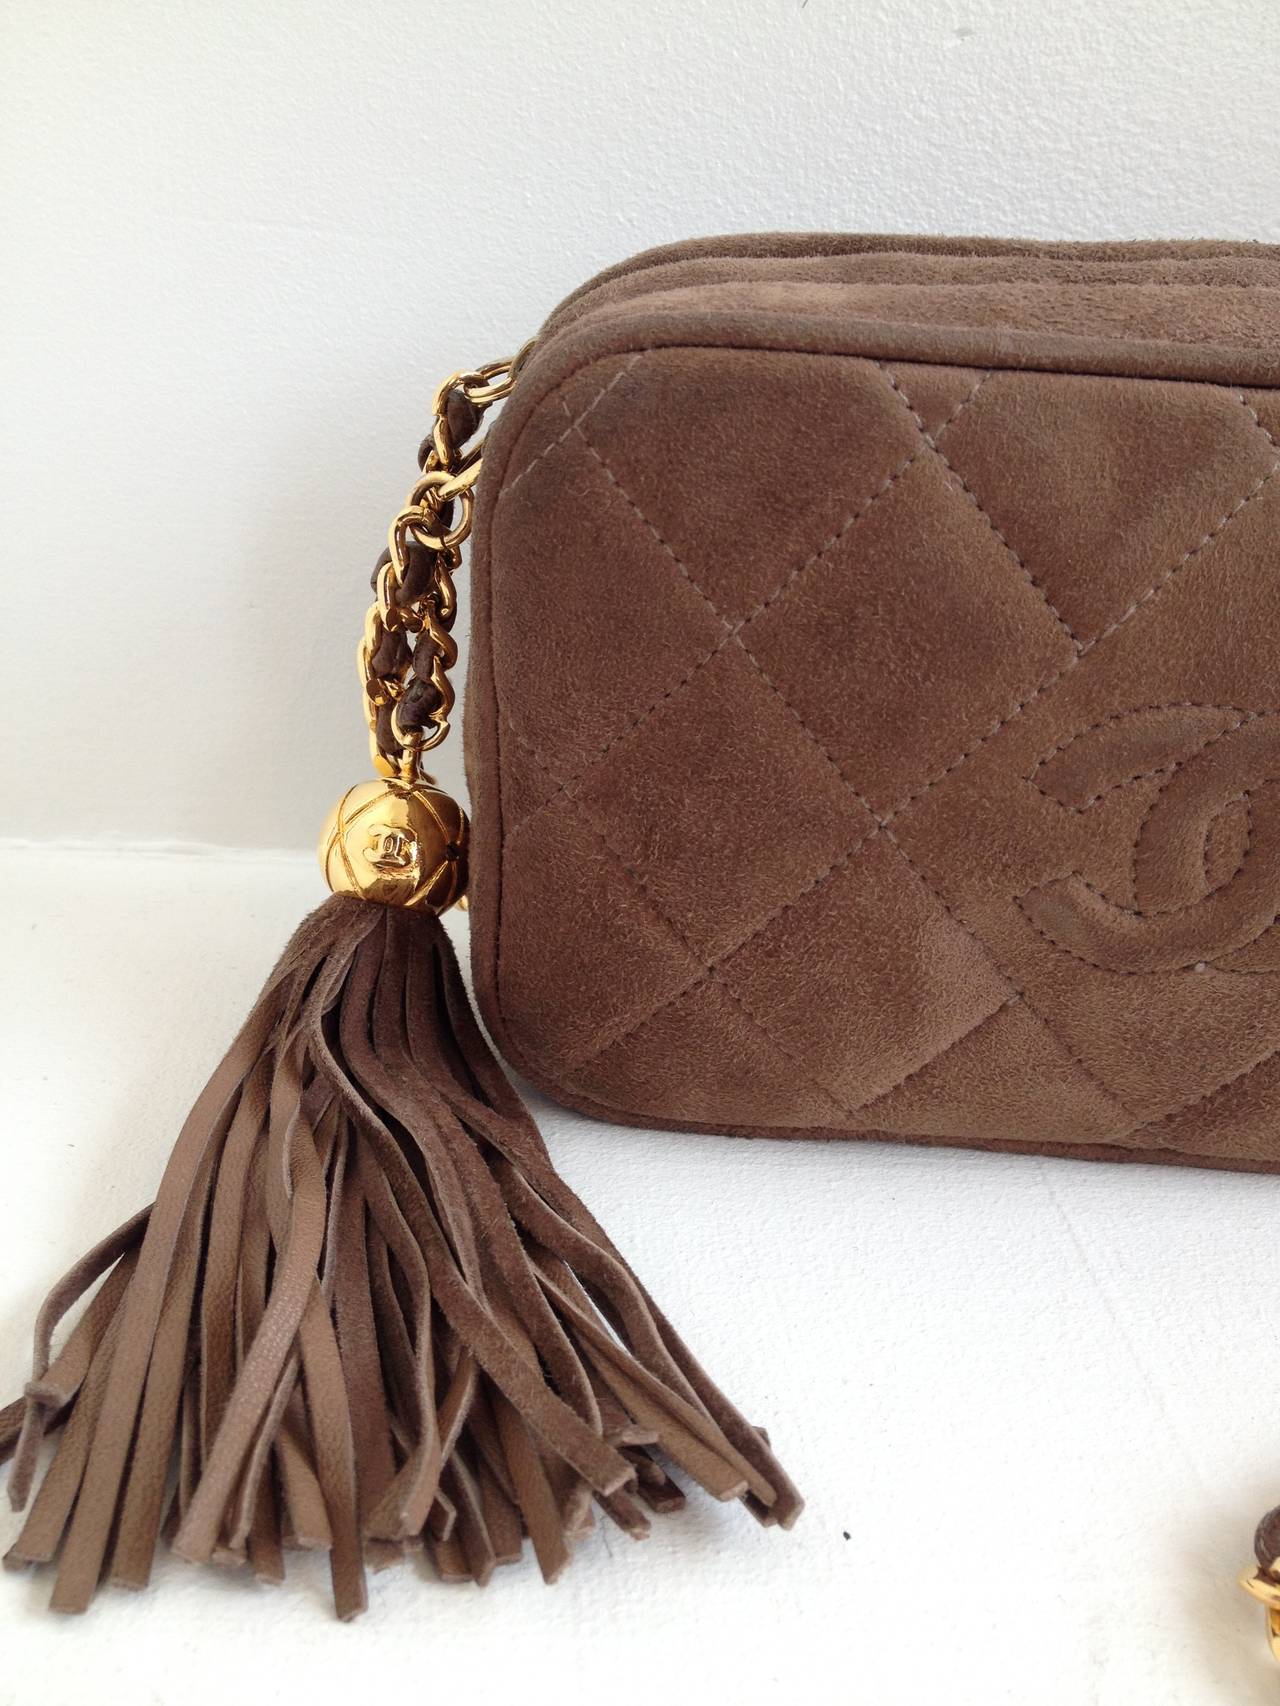 Chanel Brown Suede Crossbody Purse with Tassel 2